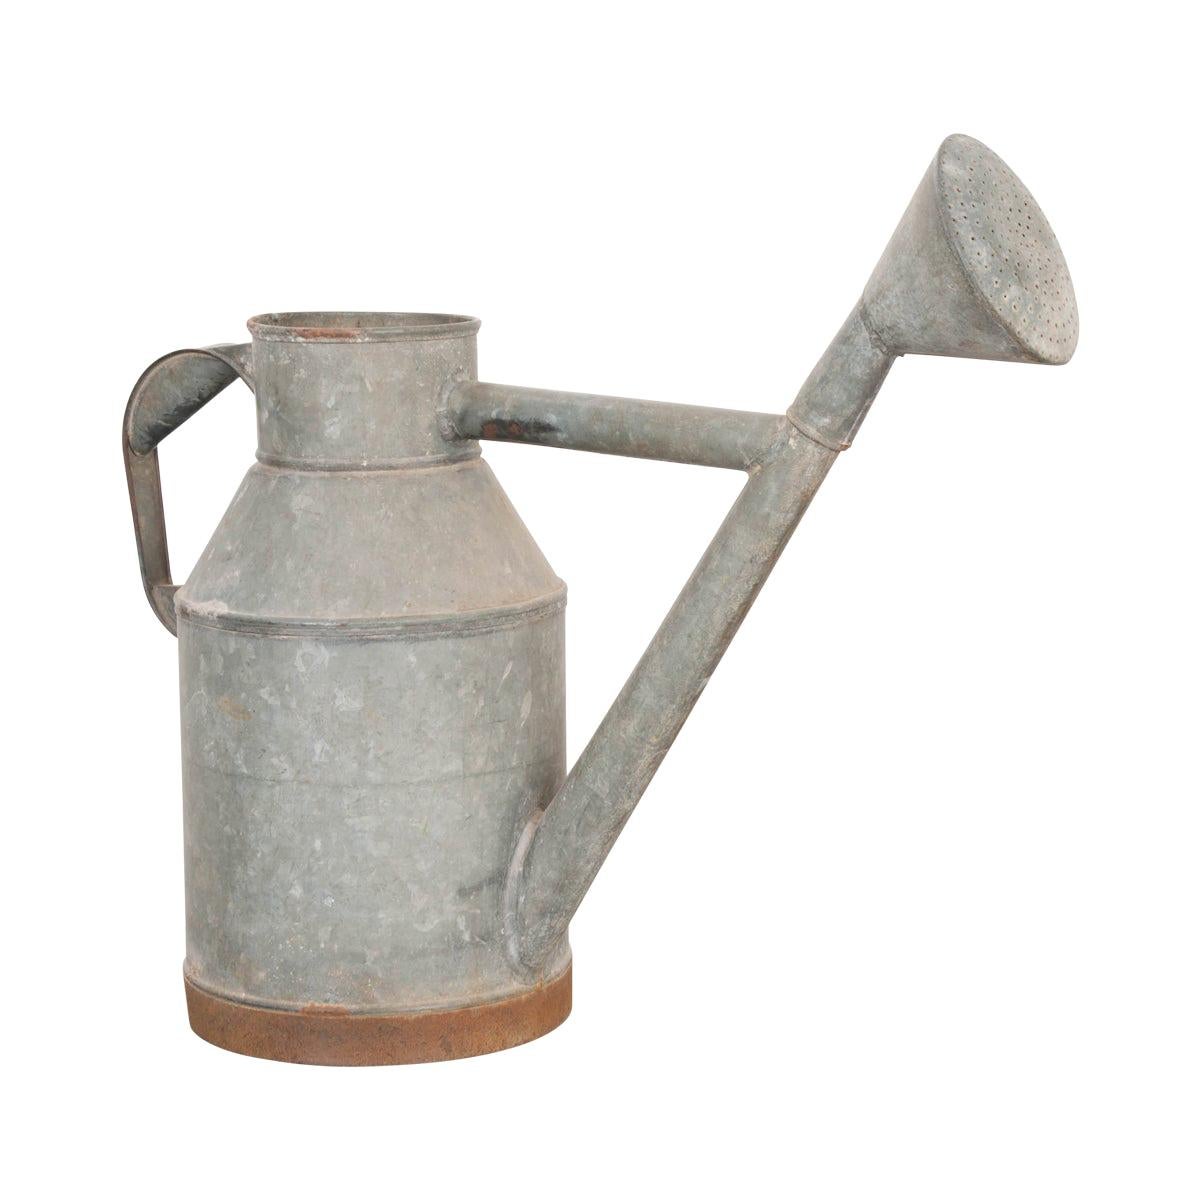 English Early 20th Century Zinc Watering Can